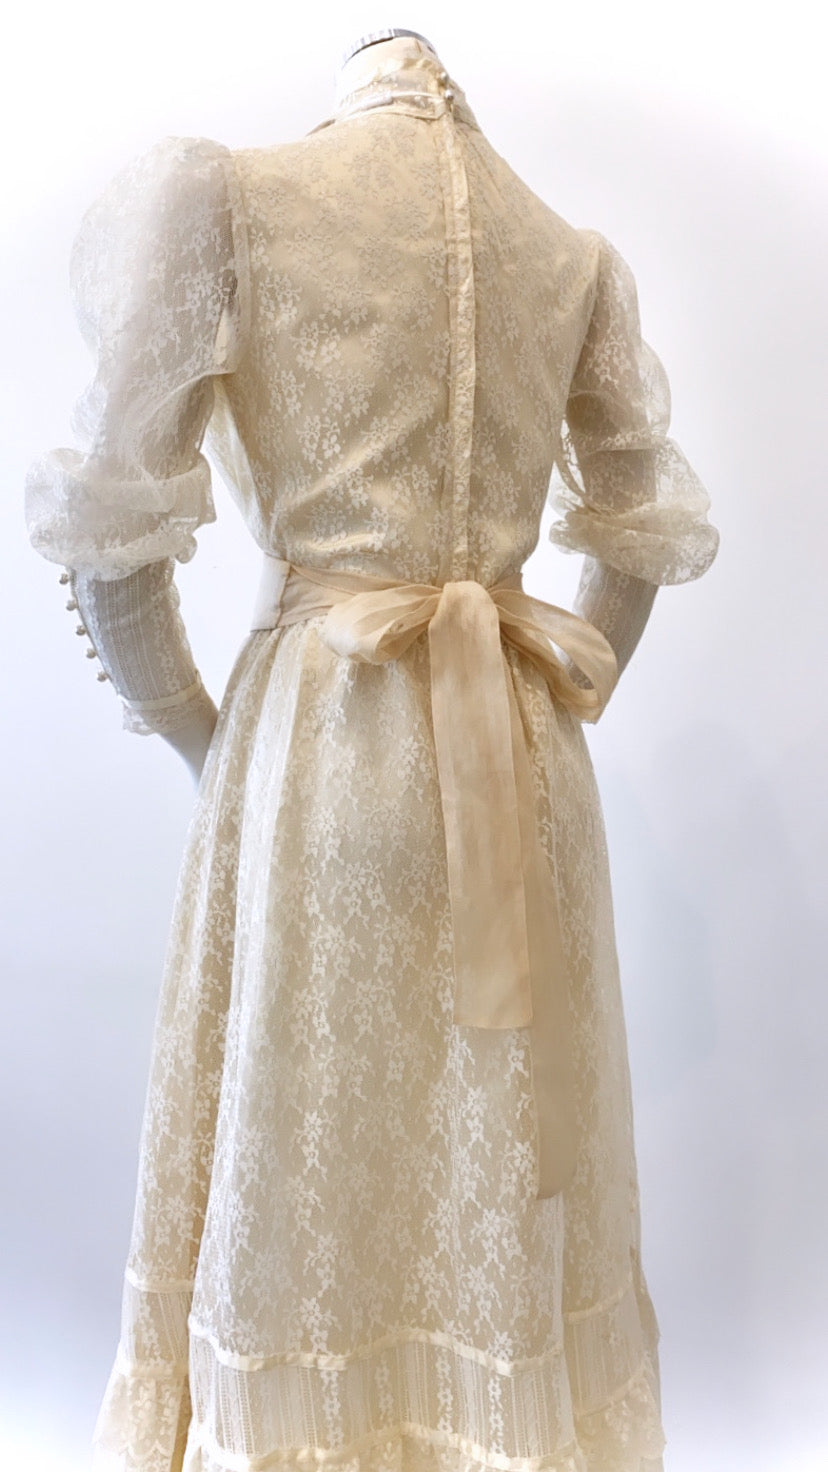 Vintage - Ruffled Lace Dress with Buttoned Cuffs